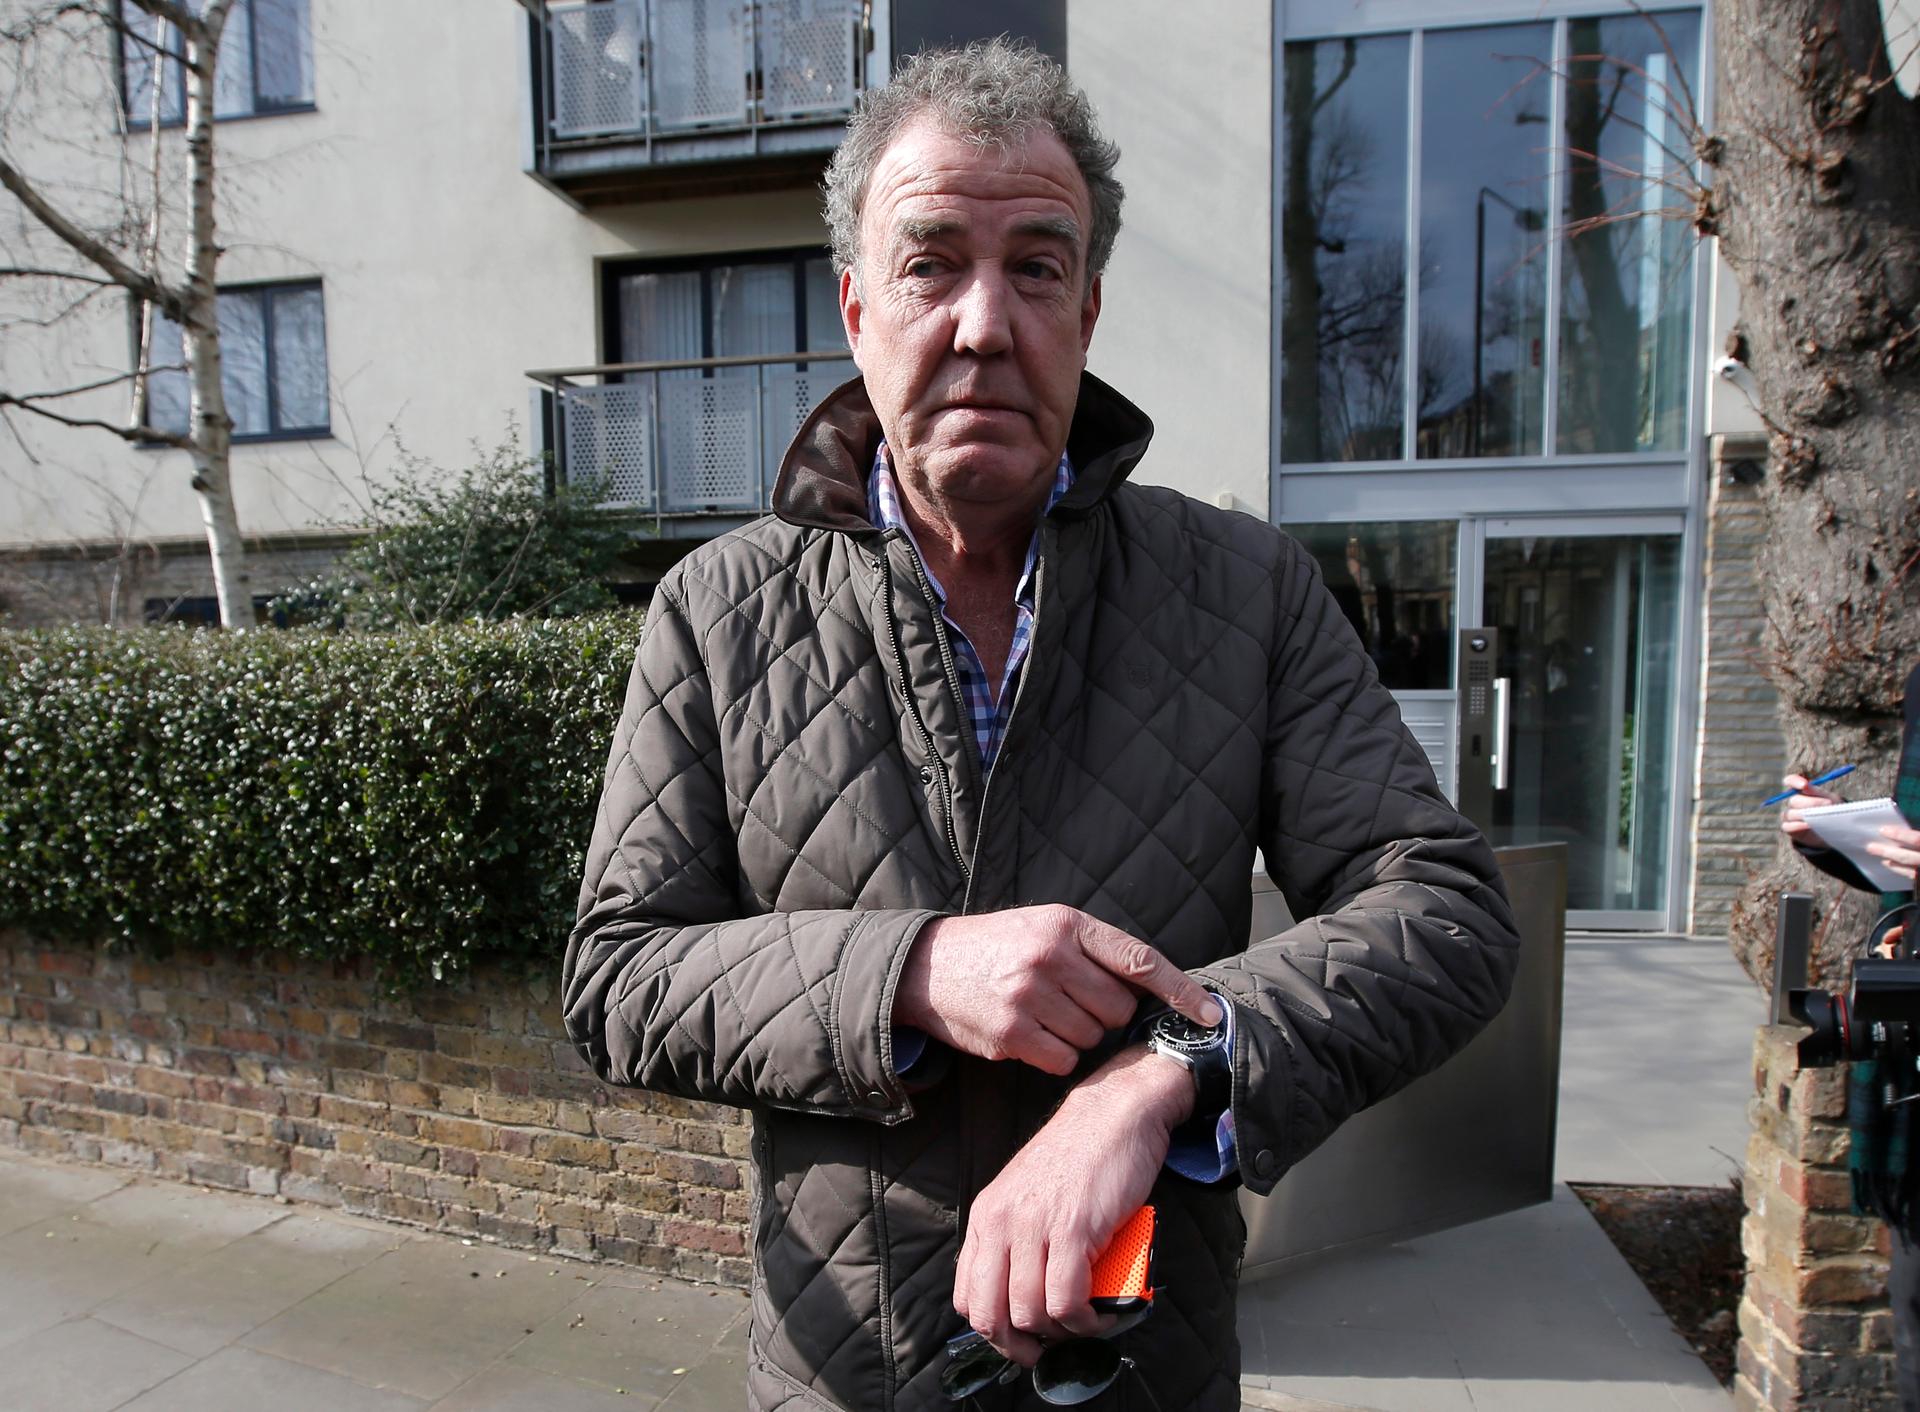 The BBC's Jeremy Clarkson has been suspended following an alleged fight with a member of his production staff